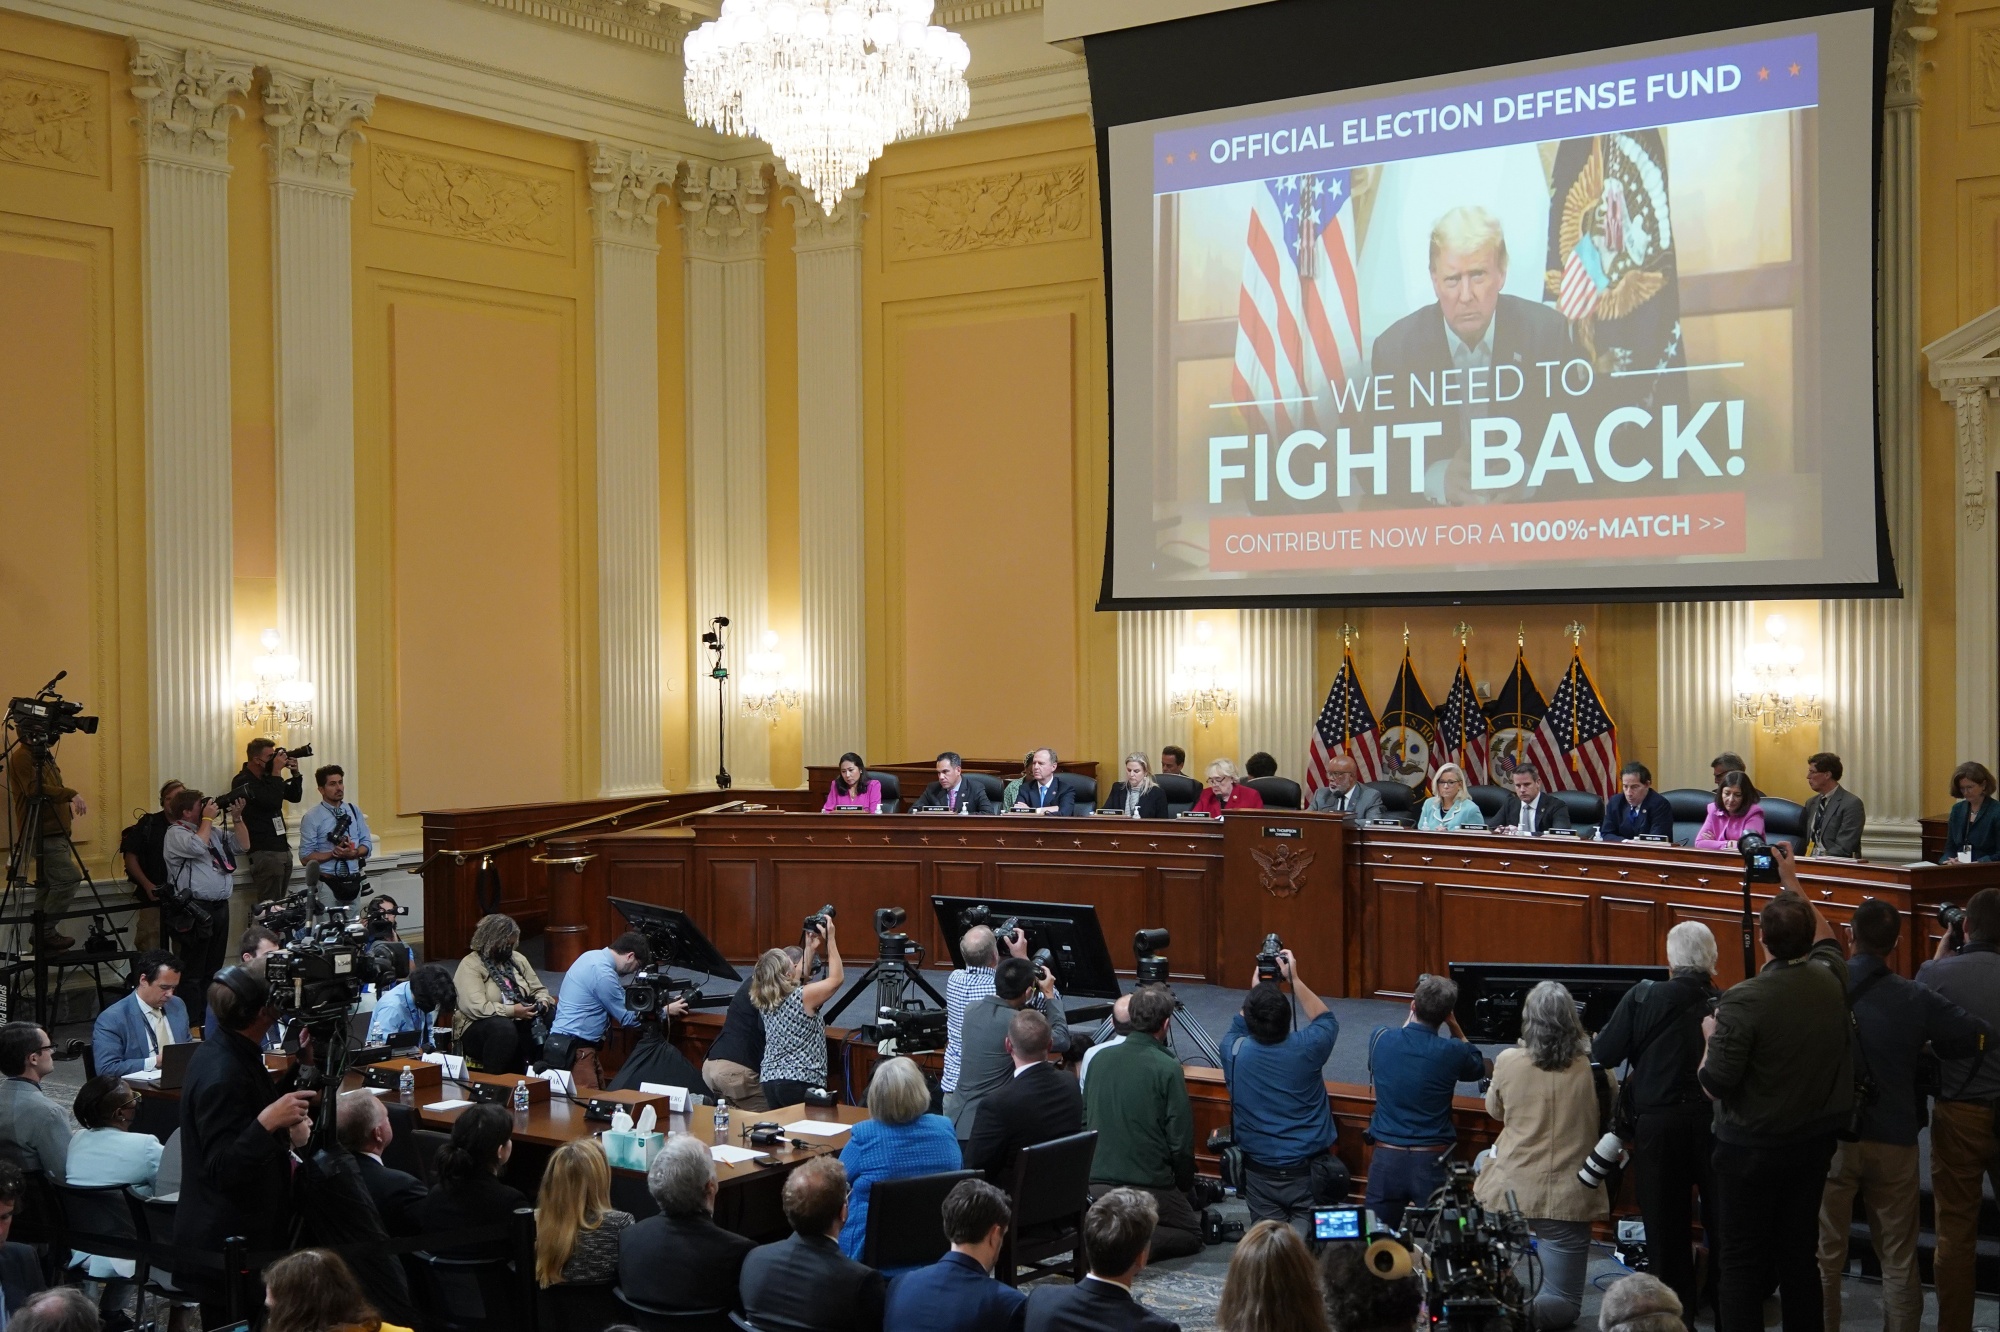 A fundraiser image for former President Donald Trump&nbsp;displayed&nbsp;during a hearing of the Select Committee to Investigate the January 6th Attack on the US Capitol in Washington, on June 13.